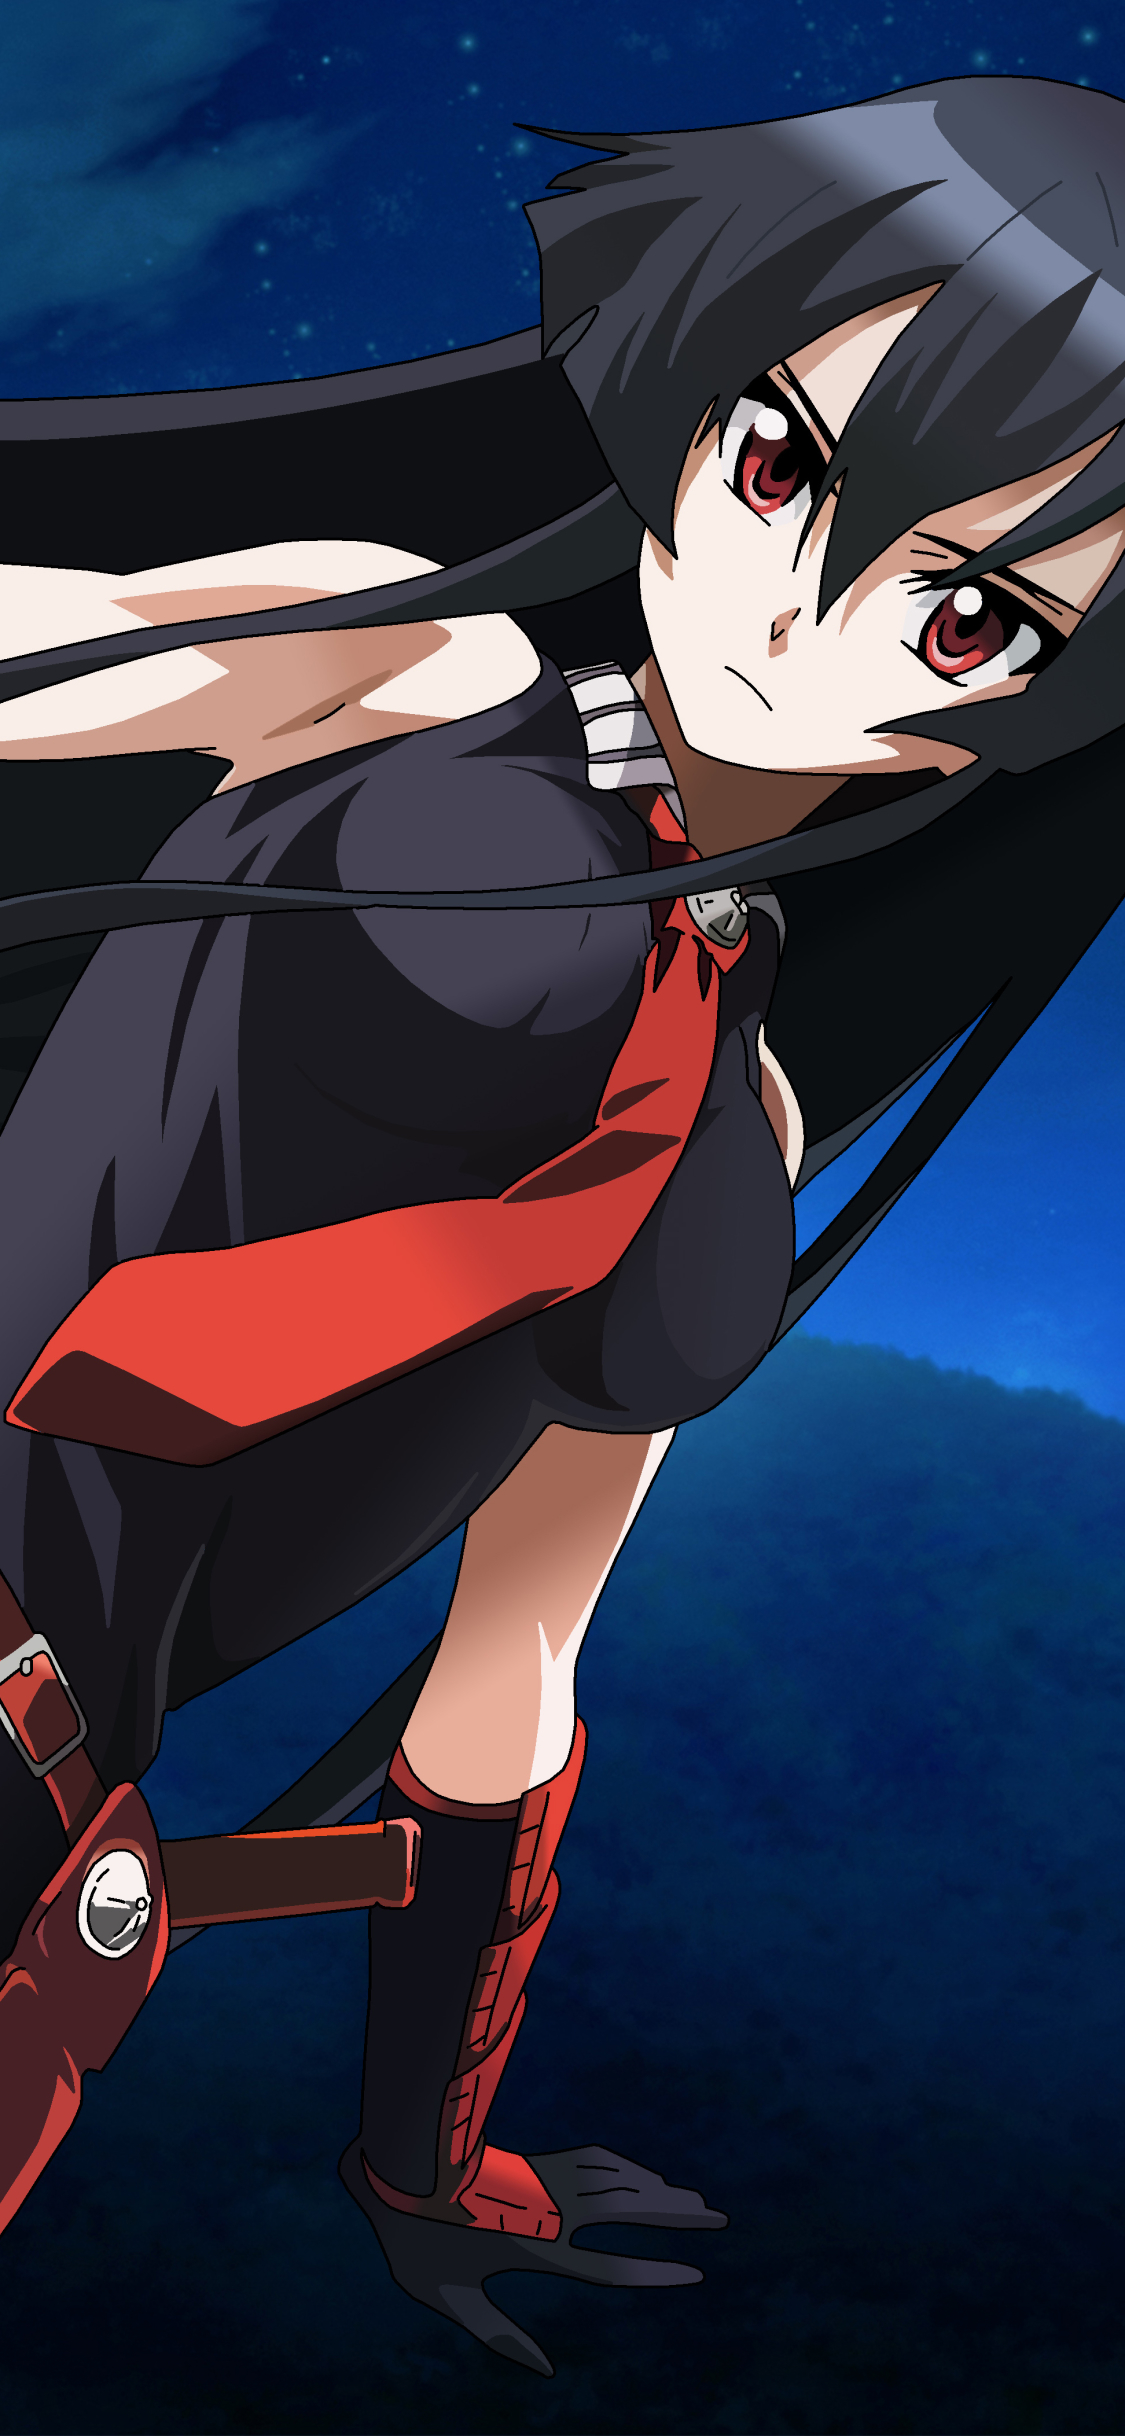 Anime Akame ga Kill! Picture - Image Abyss